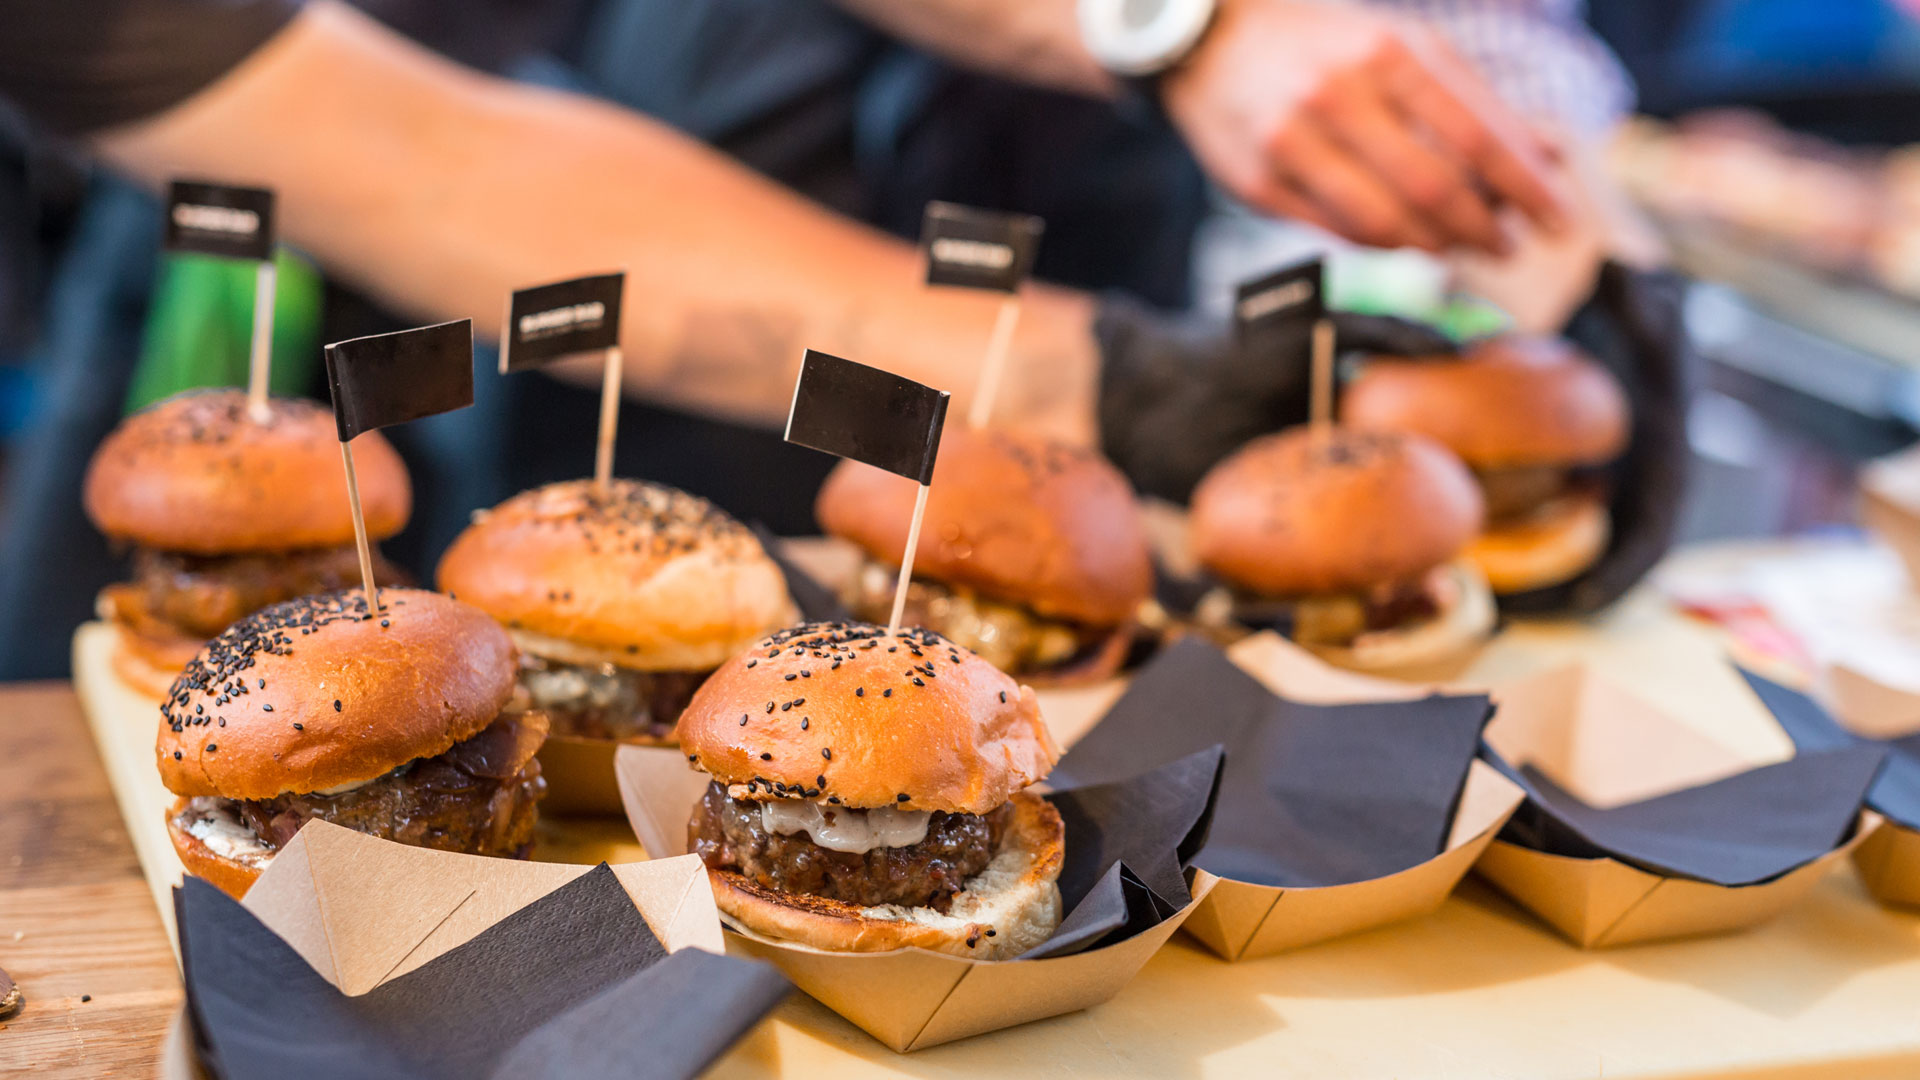 Burgers being served at food festival